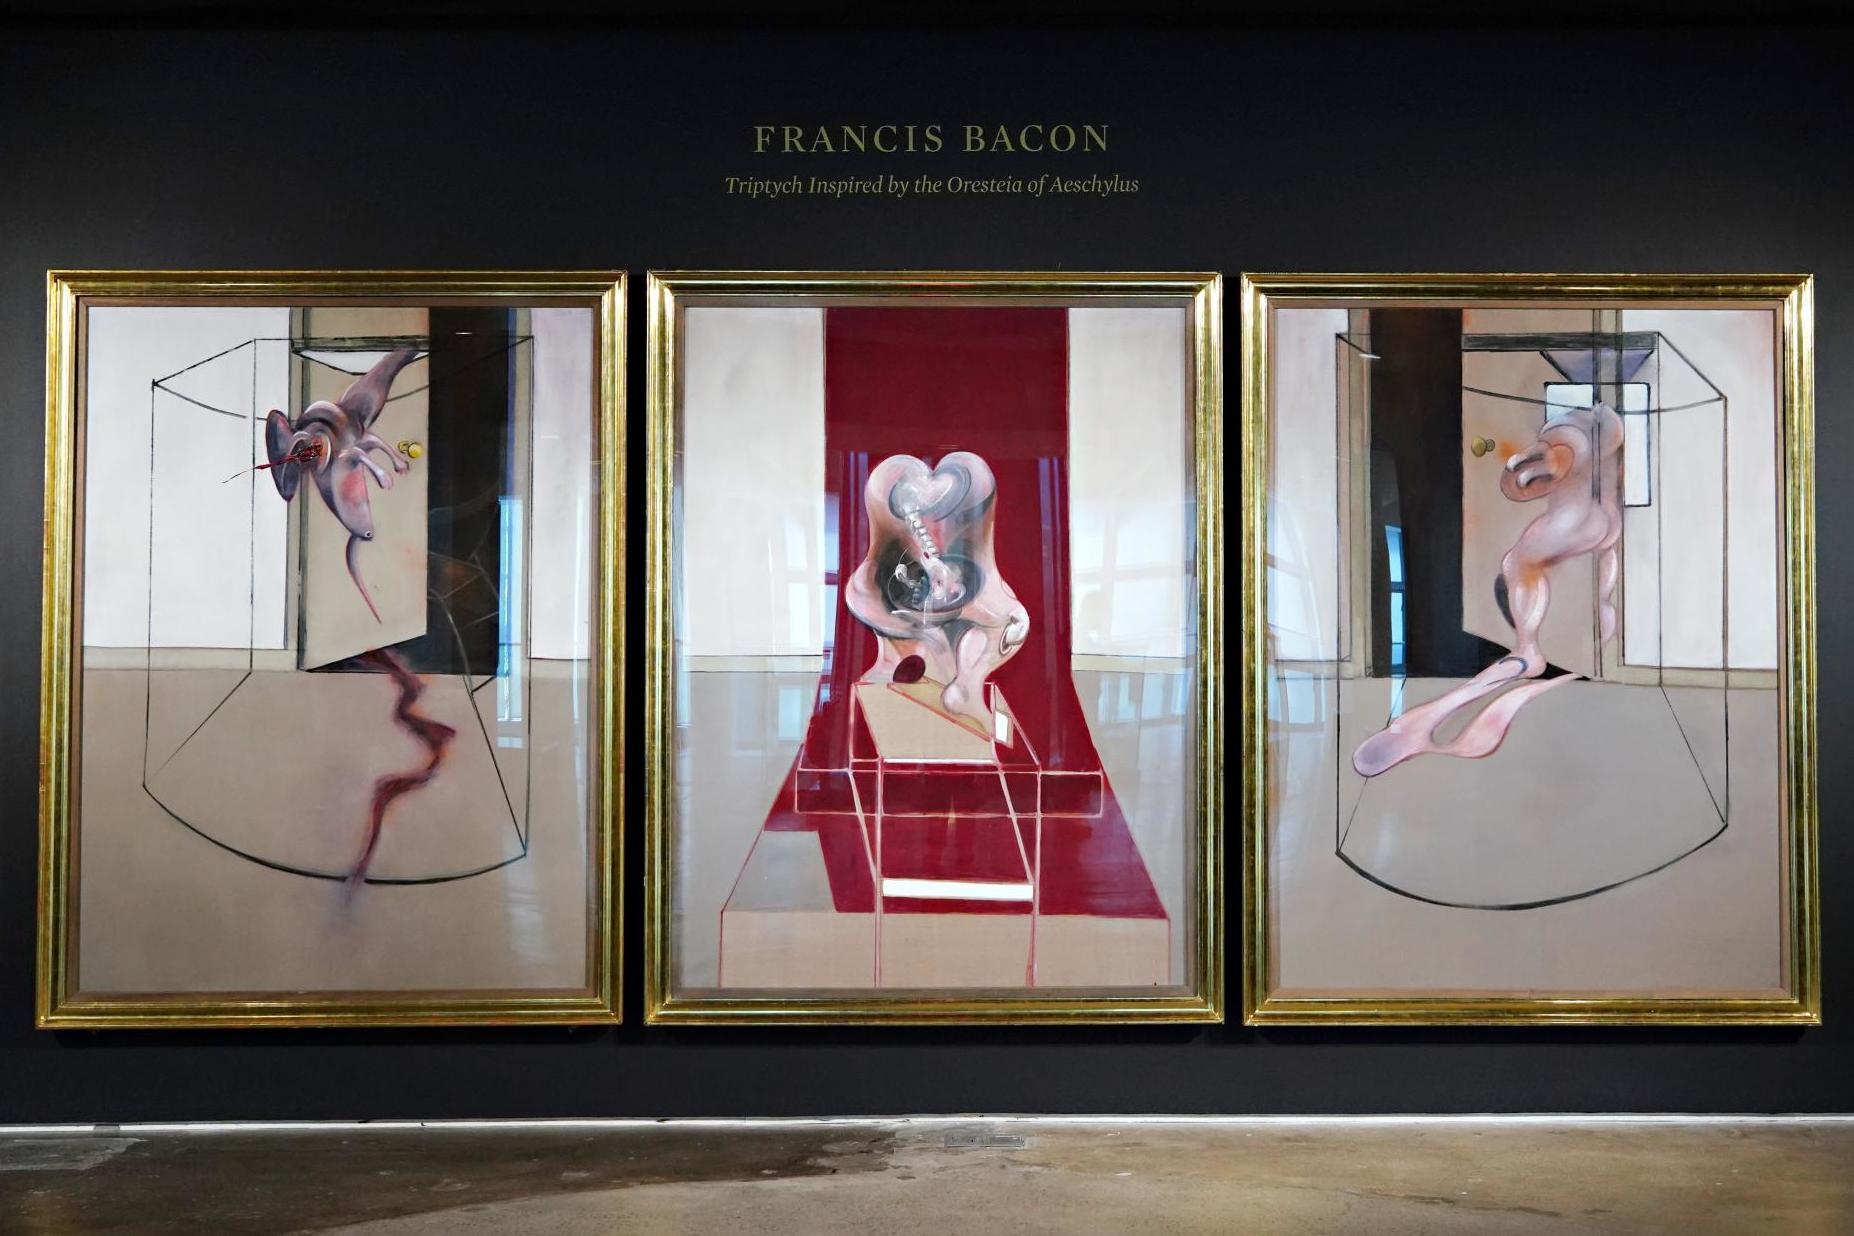 Francis Bacon triptych fetches $84m during live-streamed auction